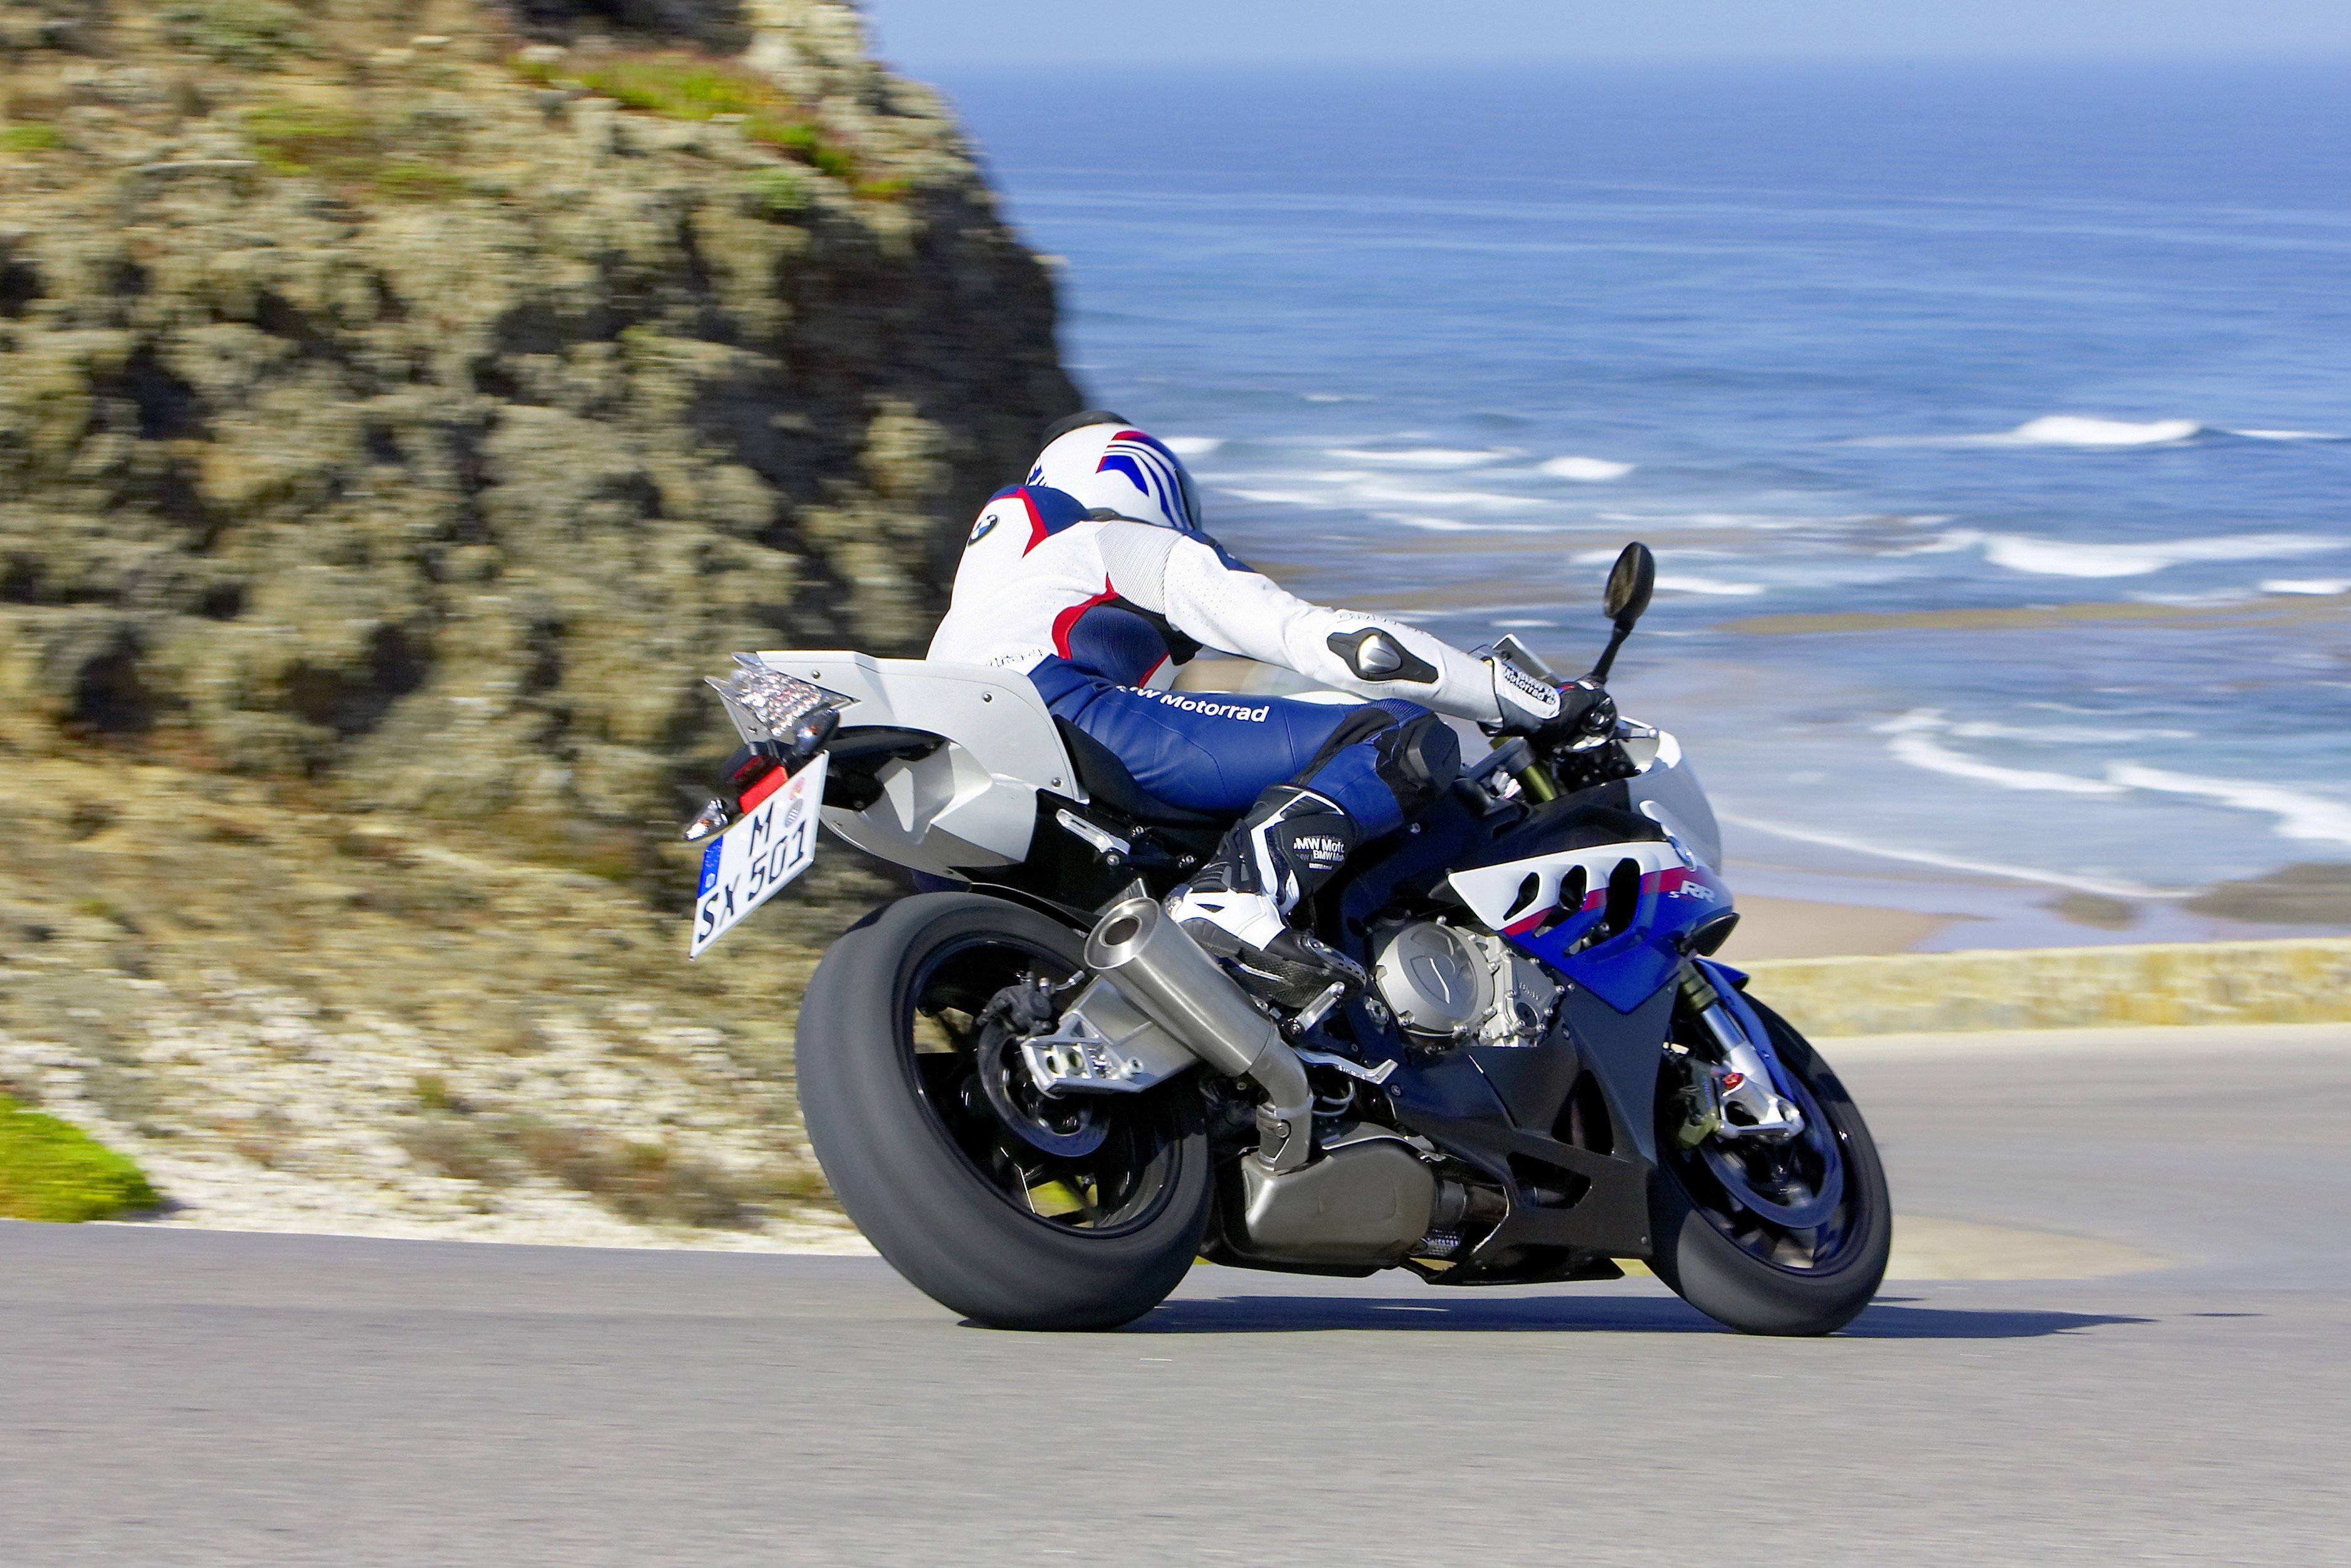 bmw, S 1000 rr, Motorcycles, 2009 Wallpaper